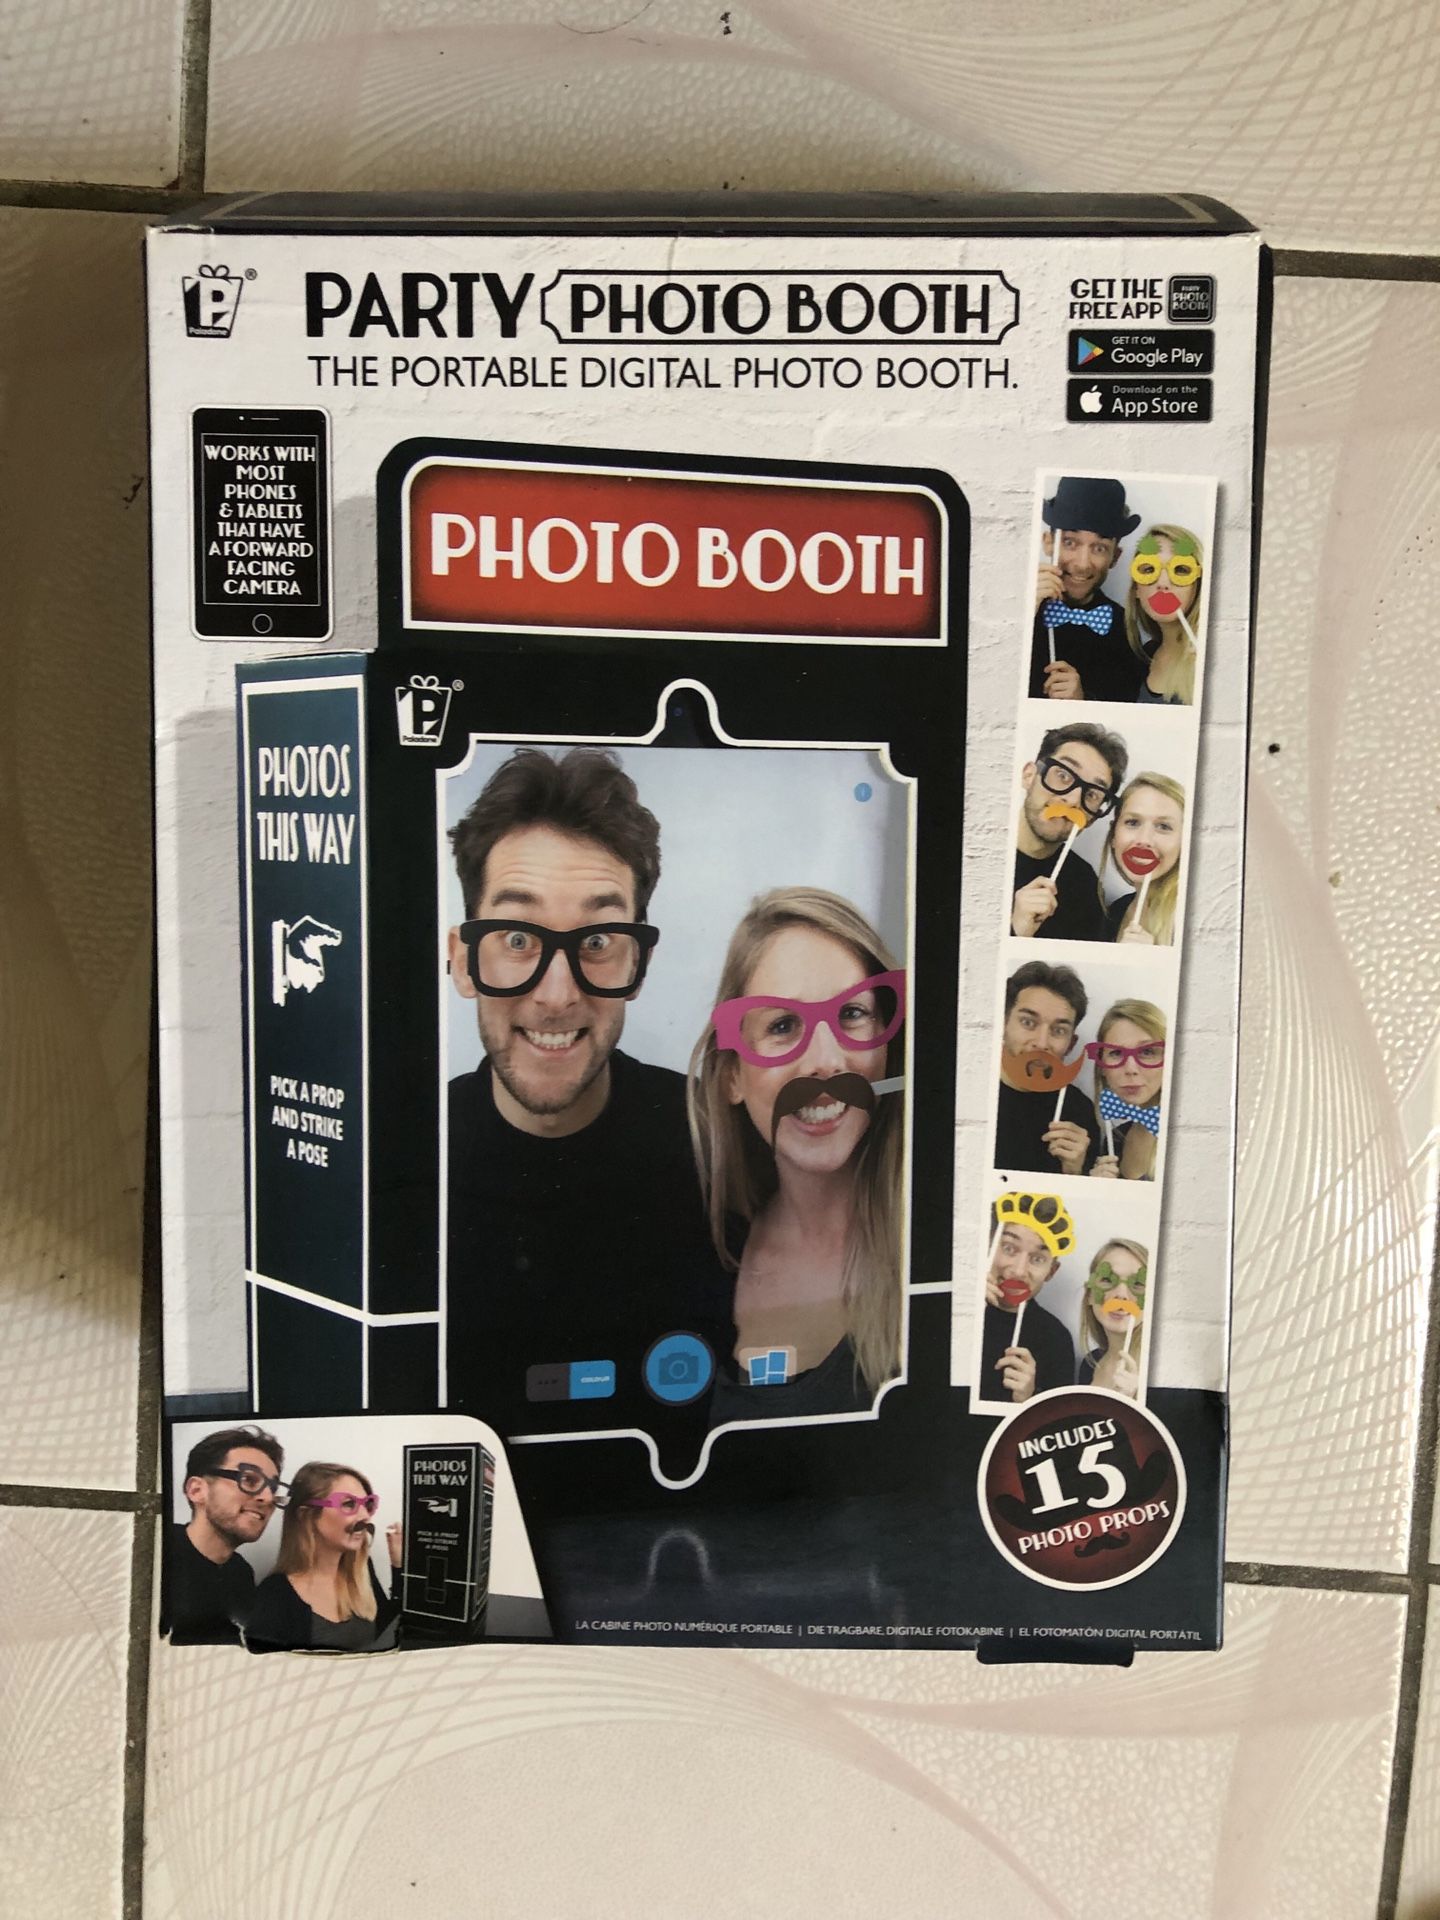 PARTY PHOTO BOOTH